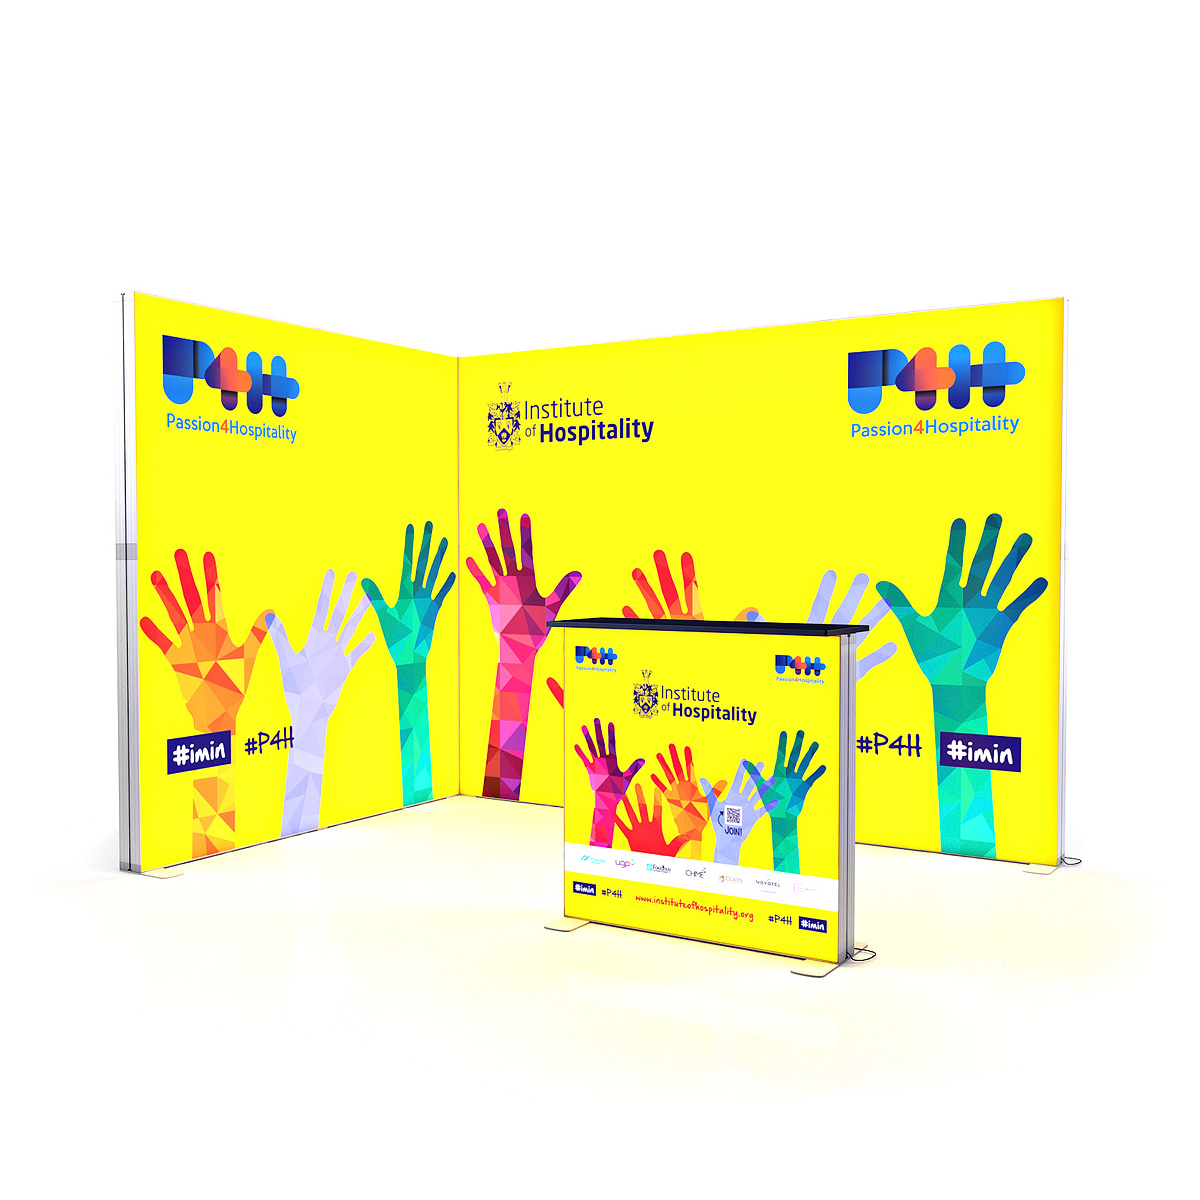 FABRILUX® 3x2 LED Lightbox Freestanding Fabric Exhibition Stand Kit 9